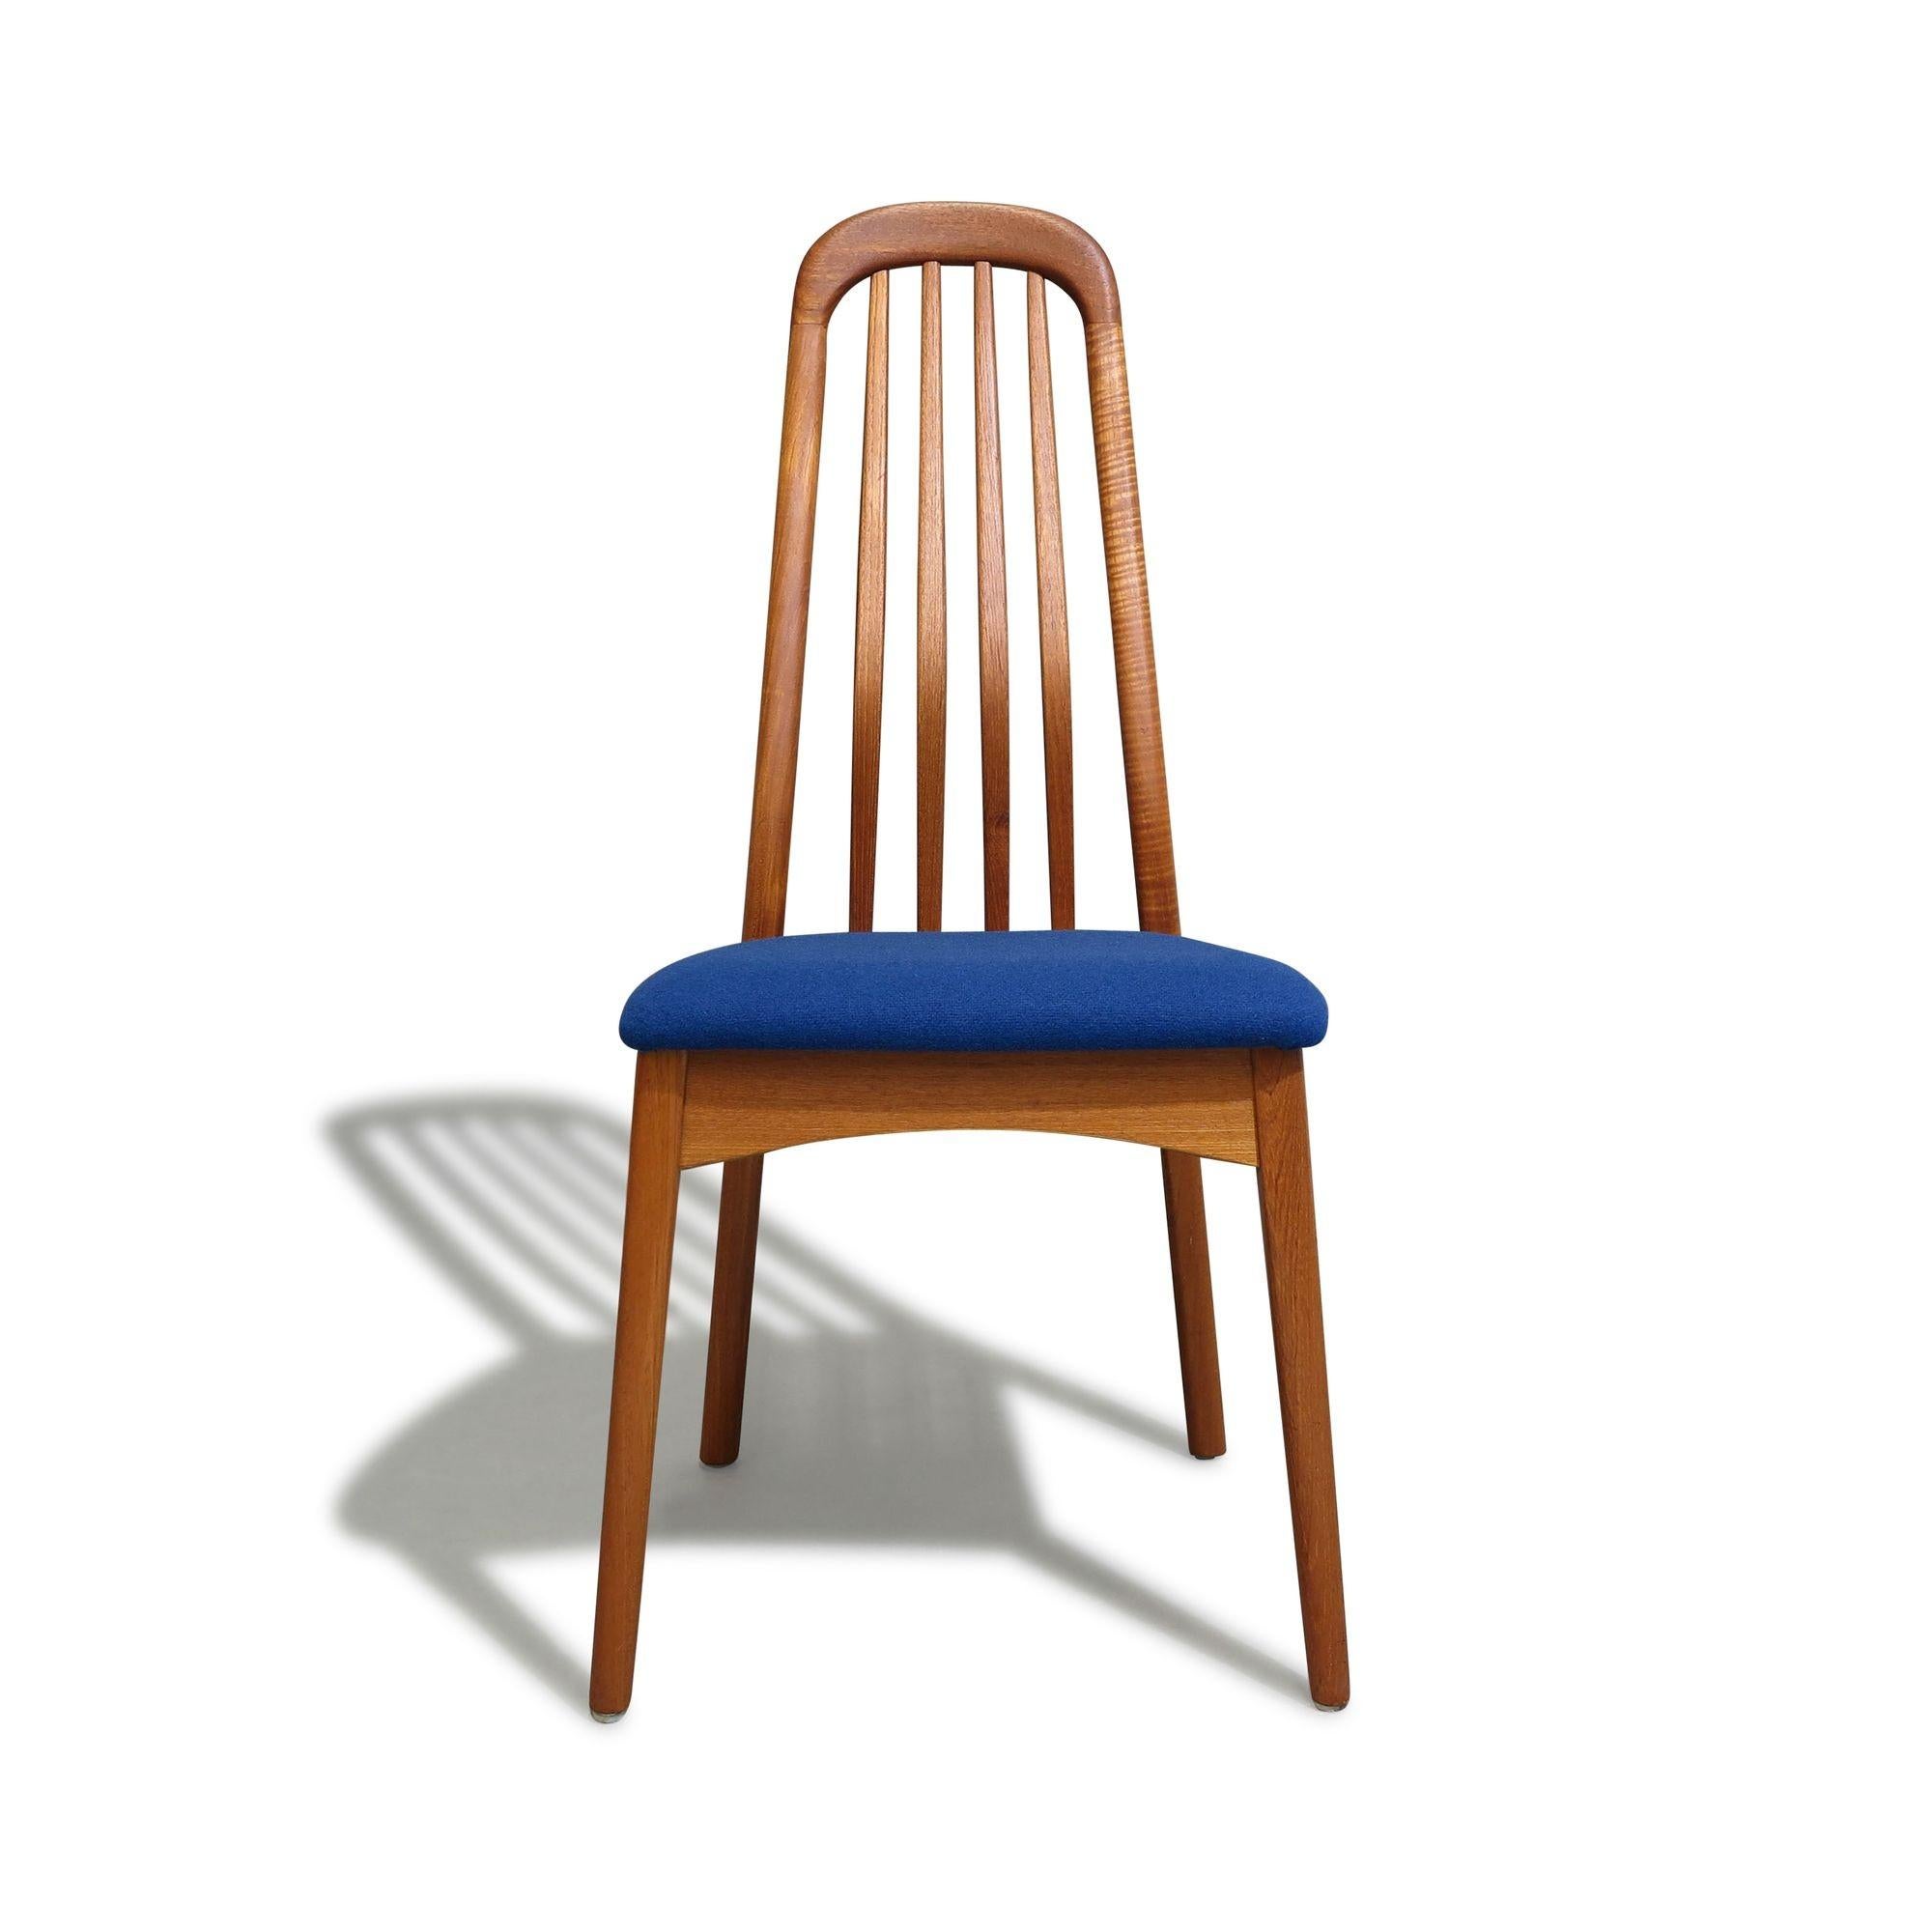 Six solid teak dining chairs crafted of solid teak with angled, slatted back rests, which offers comfortable lumbar support. Newly upholstered in blue wool textile seats . The chairs are fully restored in excellent condition with minor signs of age